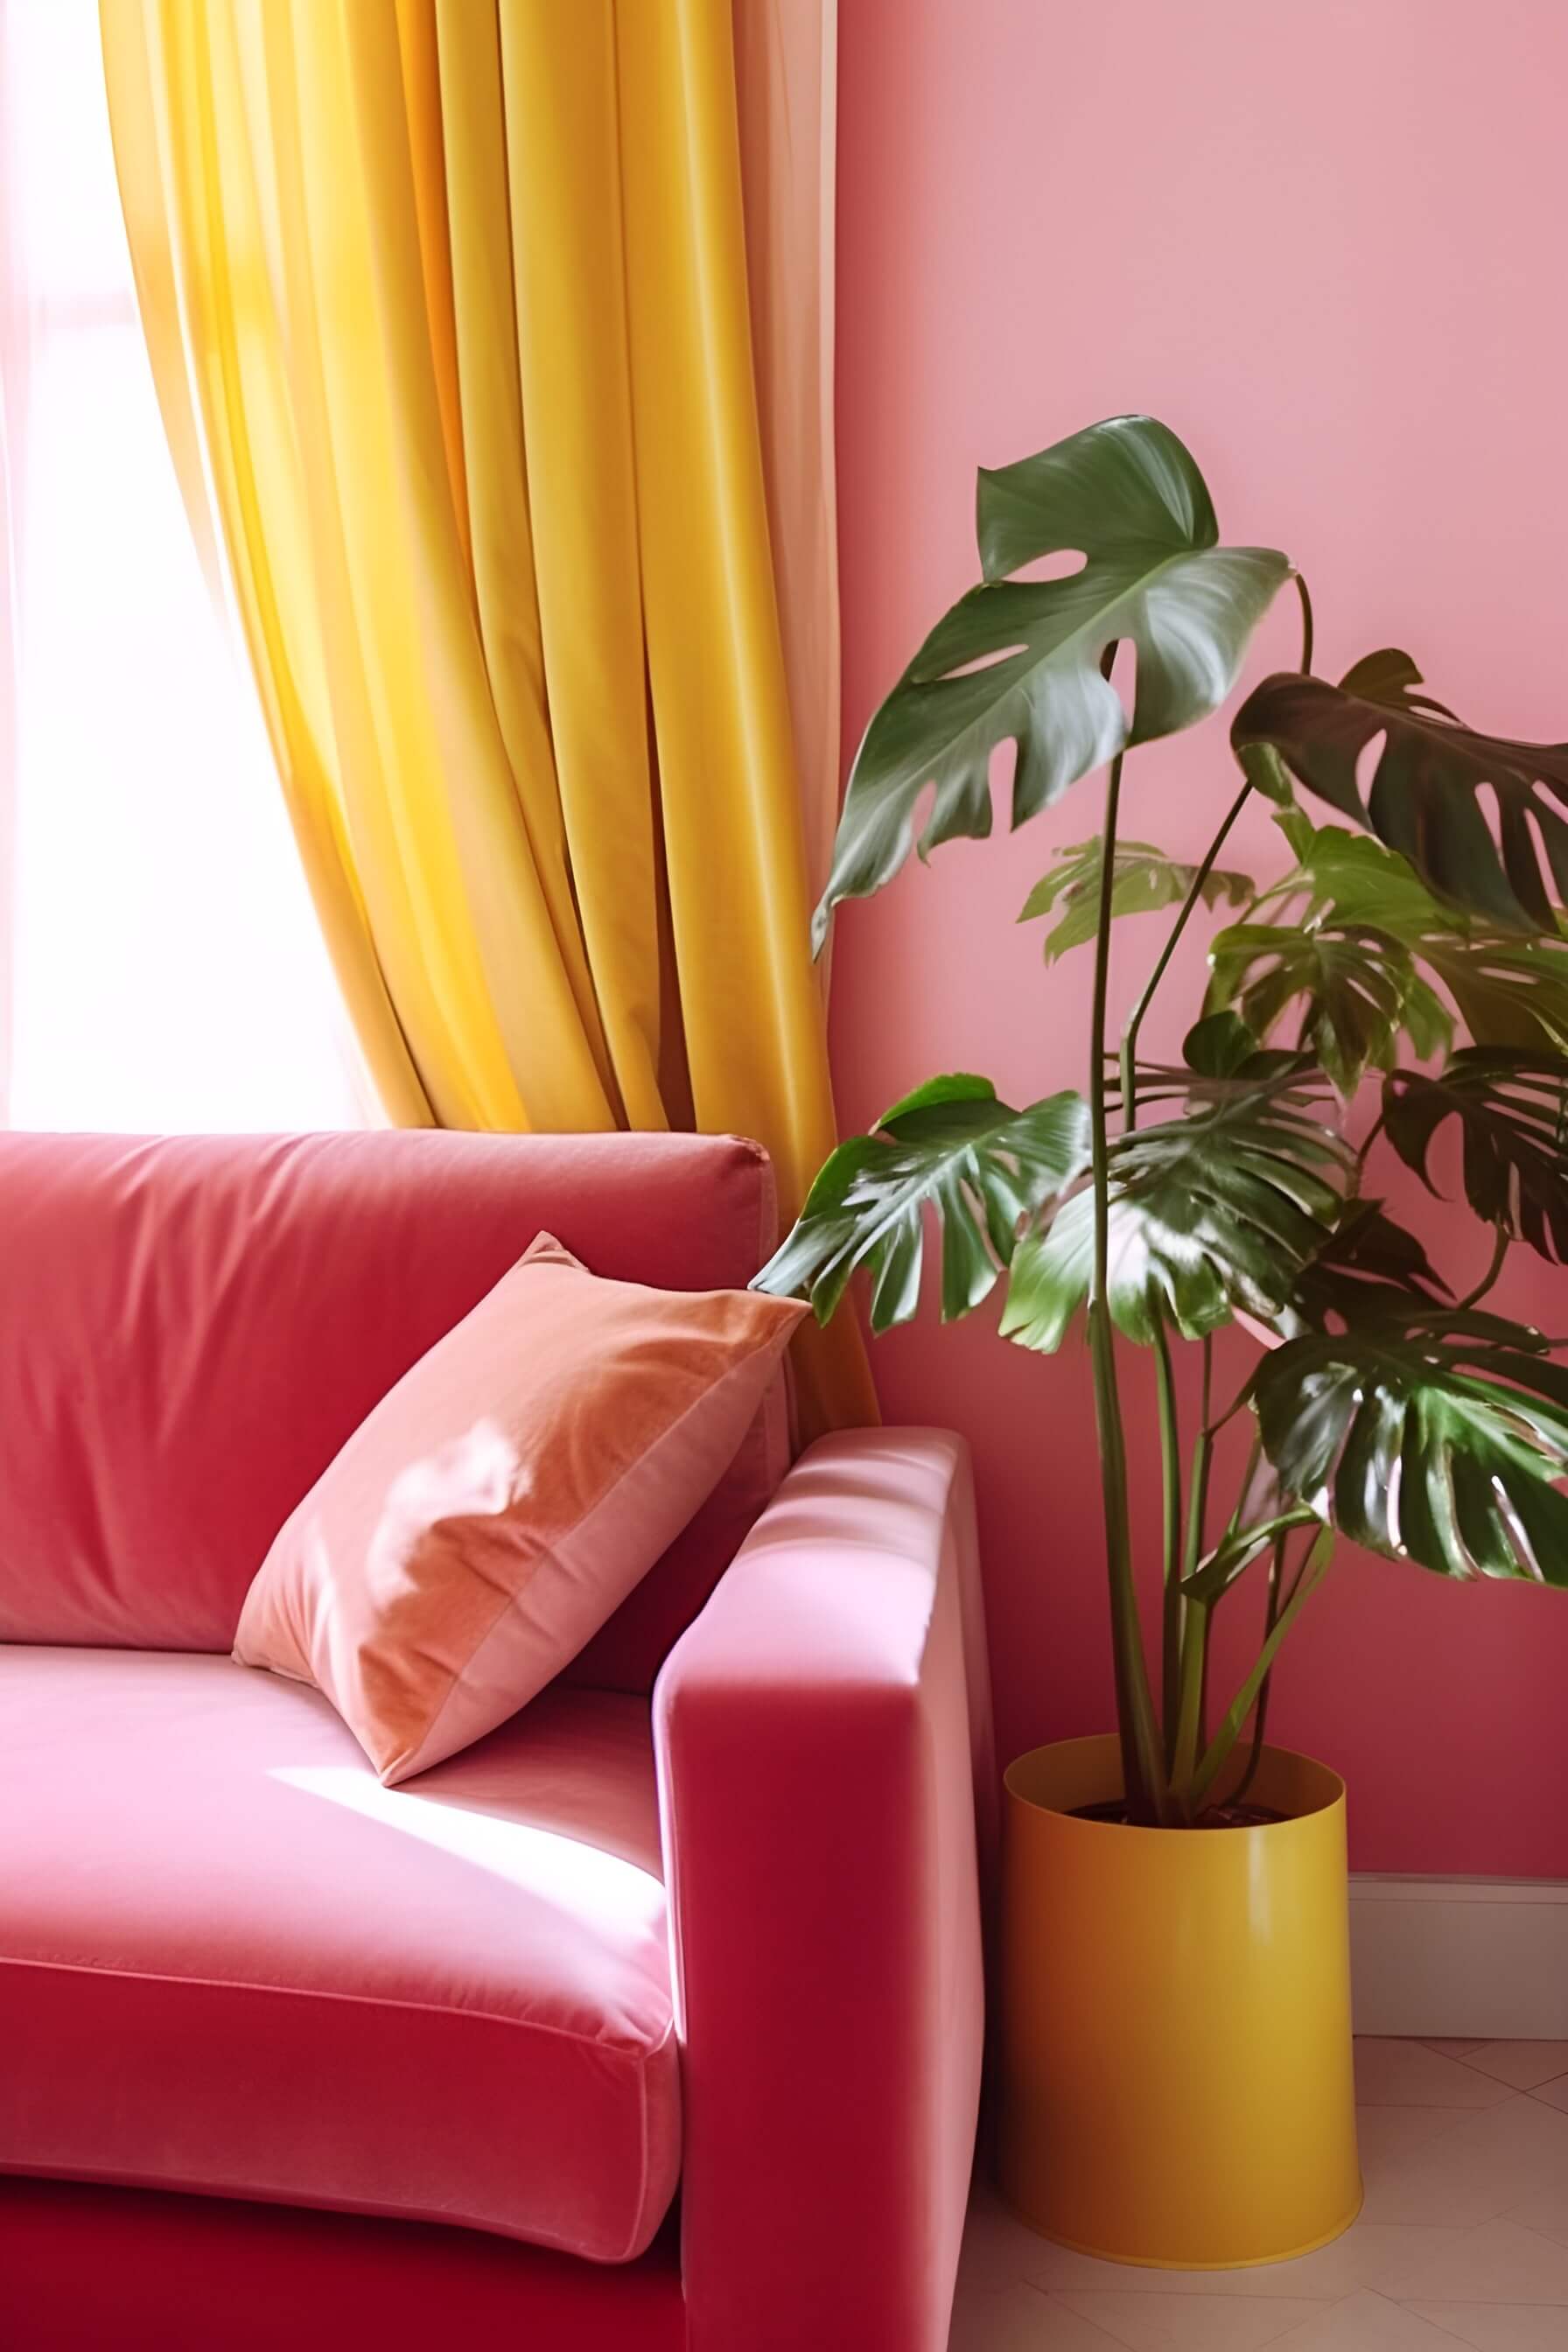 a close up photograph of a velvet pink couch and a plant in a yellow plant pot, with pink walls and yellow curtains